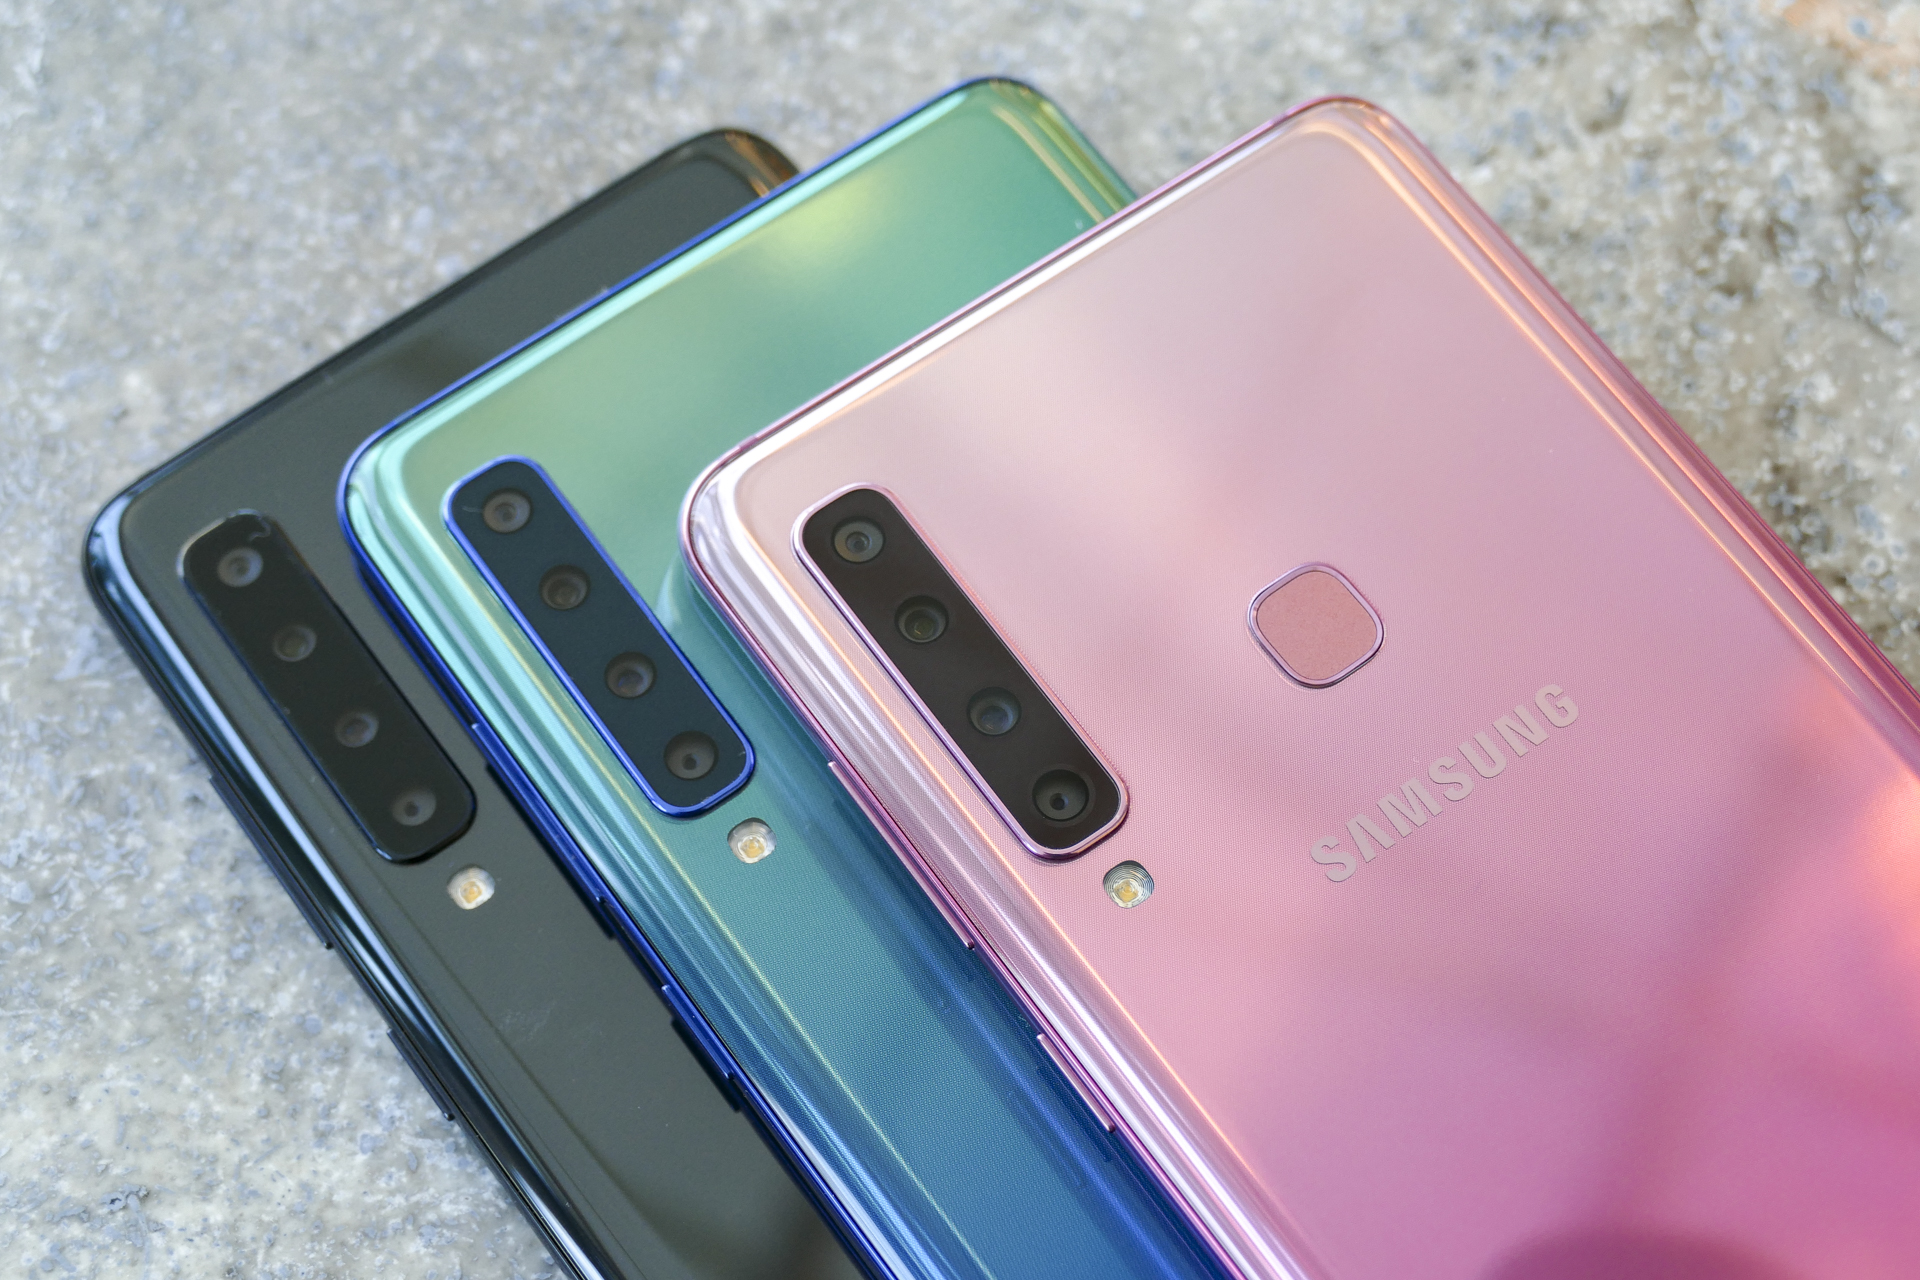 Samsung Galaxy A9 (2018) shimmers in lovely colors - CNET